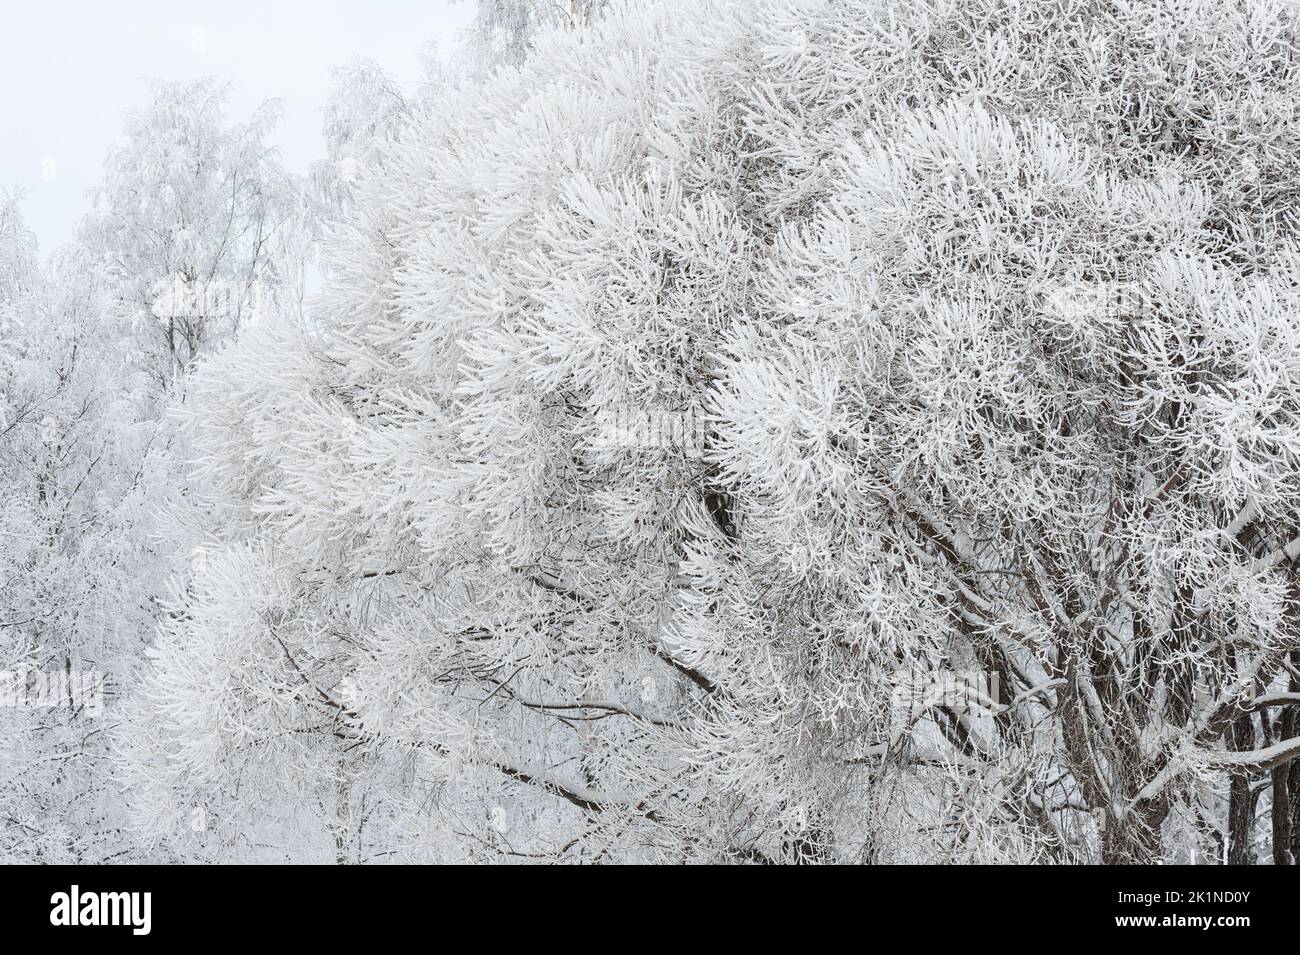 Winter scenery. Snow and frost covered crack willow (Salix fragilis) trees at park. Stock Photo